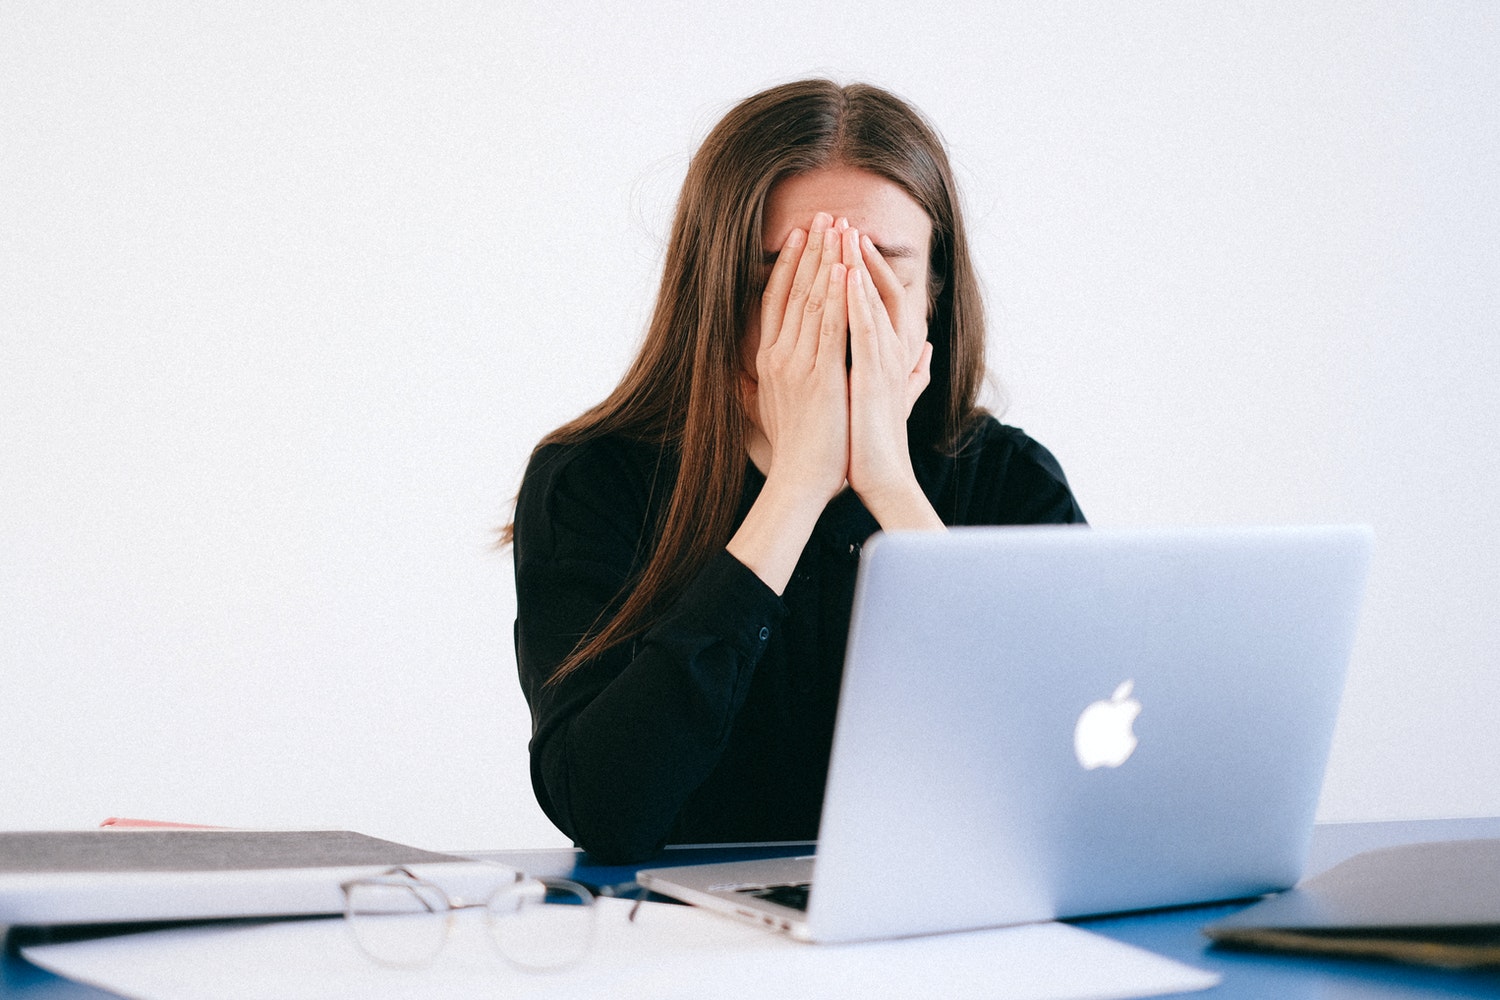 Micro-Stress Management: How To Conquer The Little Workplace Problems